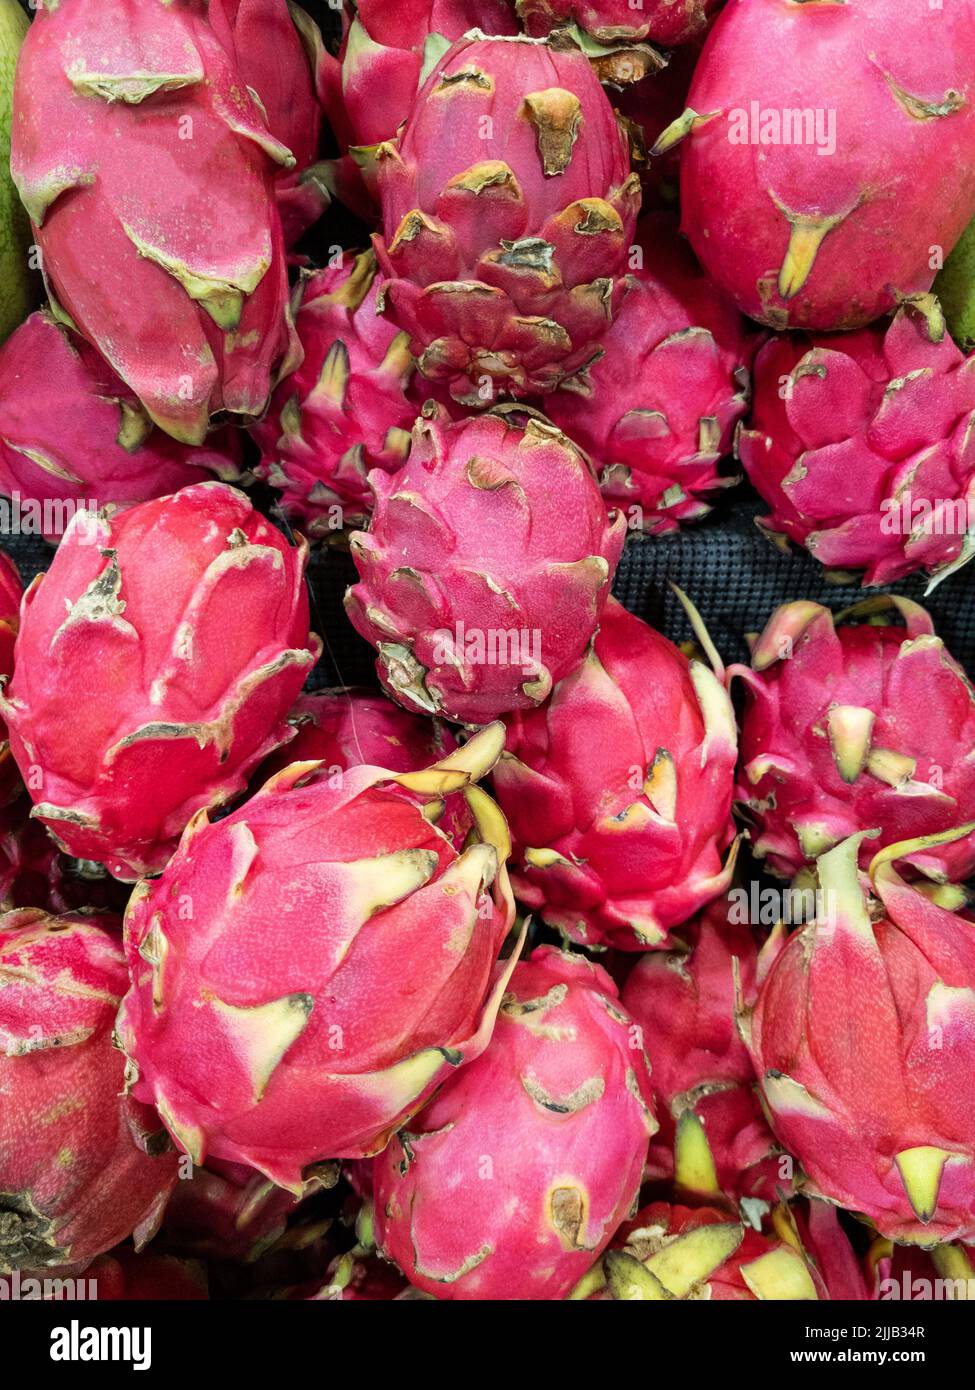 Red dragon fruits in pile on shop tray background Stock Photo